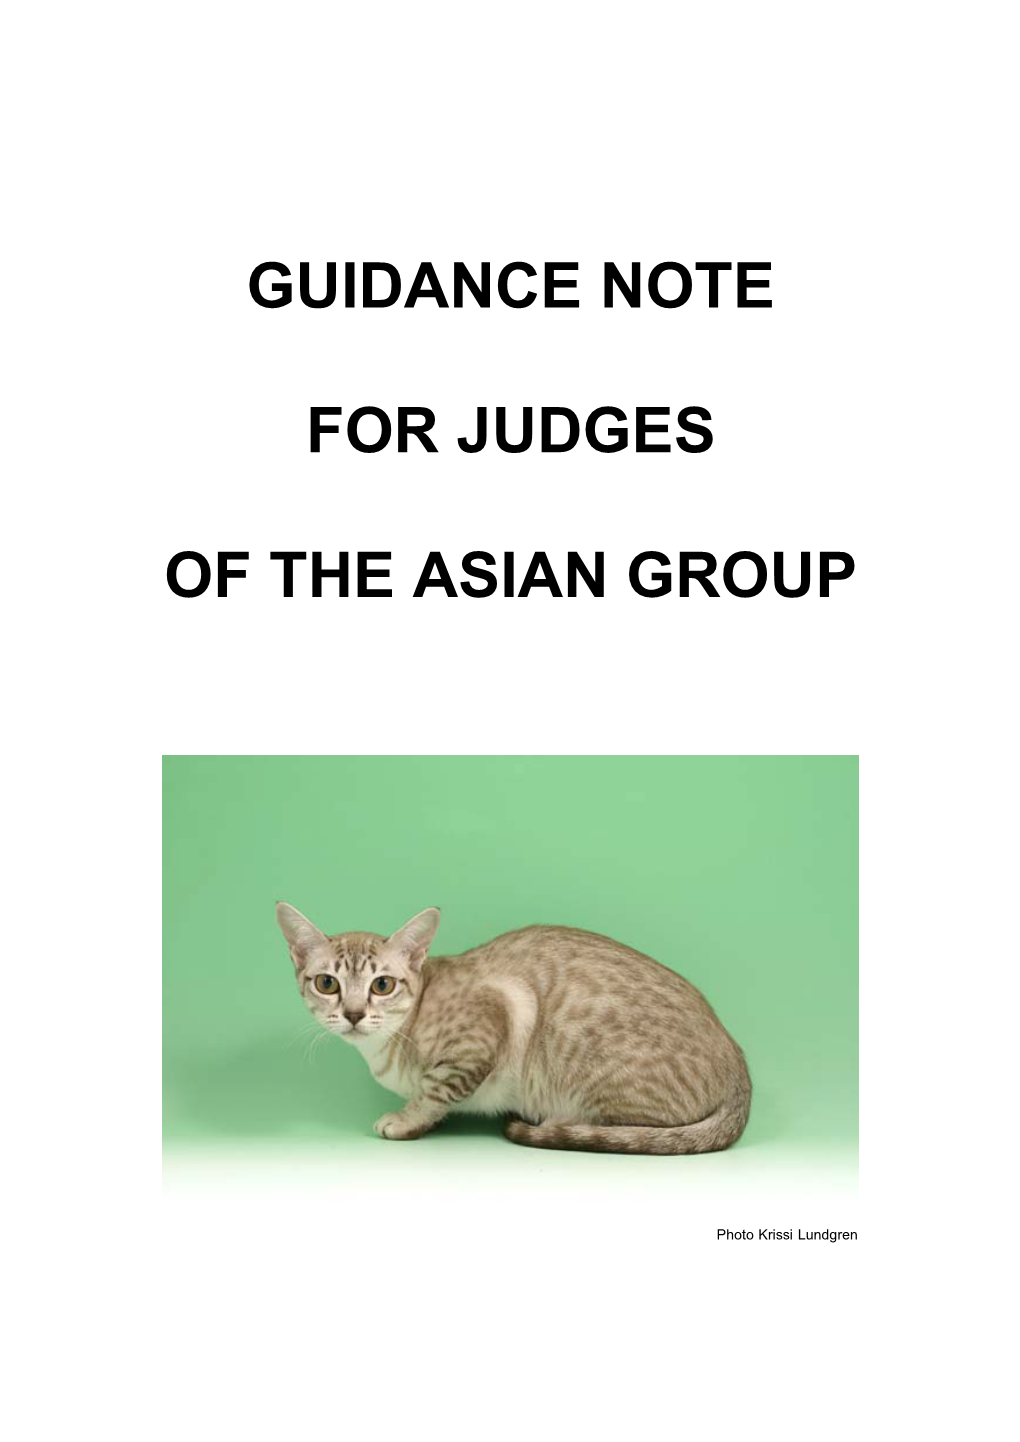 Guidance Note for Judges of Asian Group